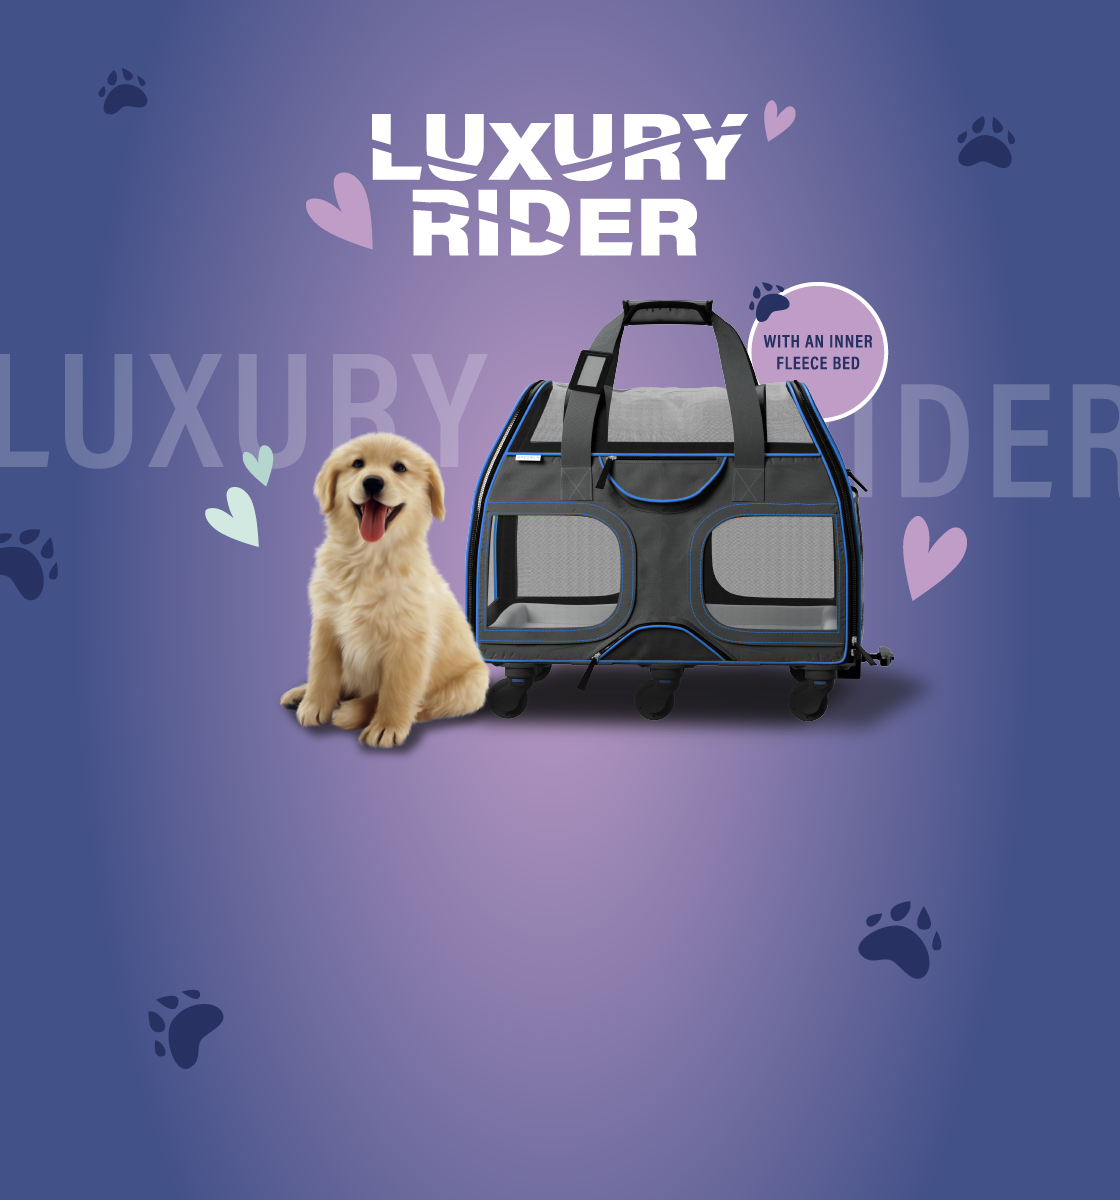 Kelle - Black Quilted Carrier - Carriers - Luxury Carriers Posh Puppy  Boutique